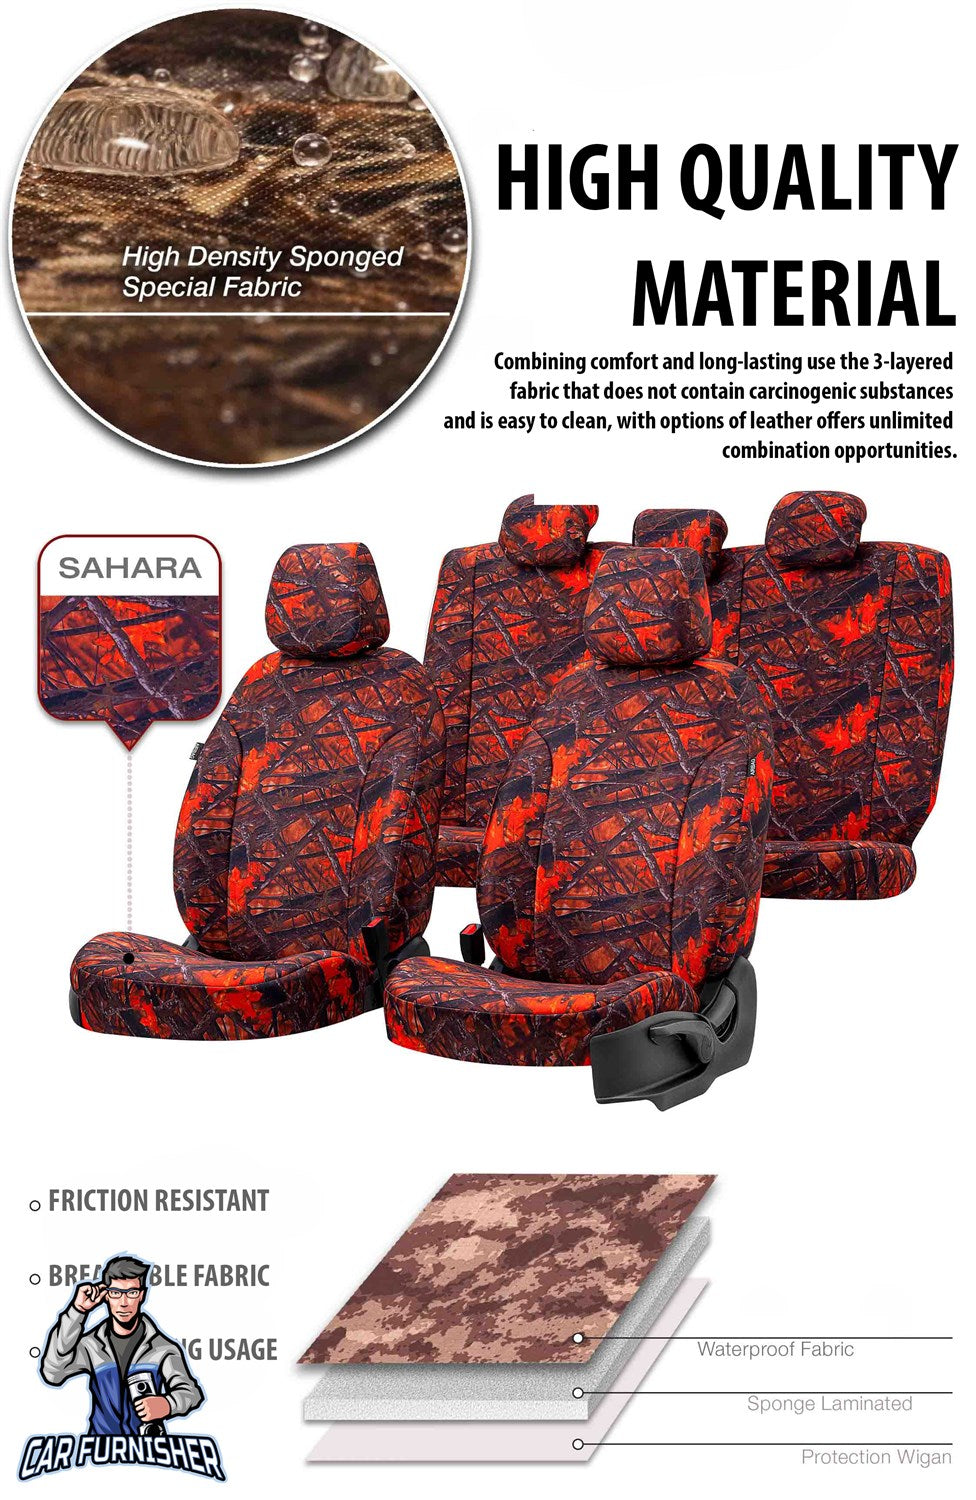 Nissan Note Seat Covers Camouflage Waterproof Design Montblanc Camo Waterproof Fabric